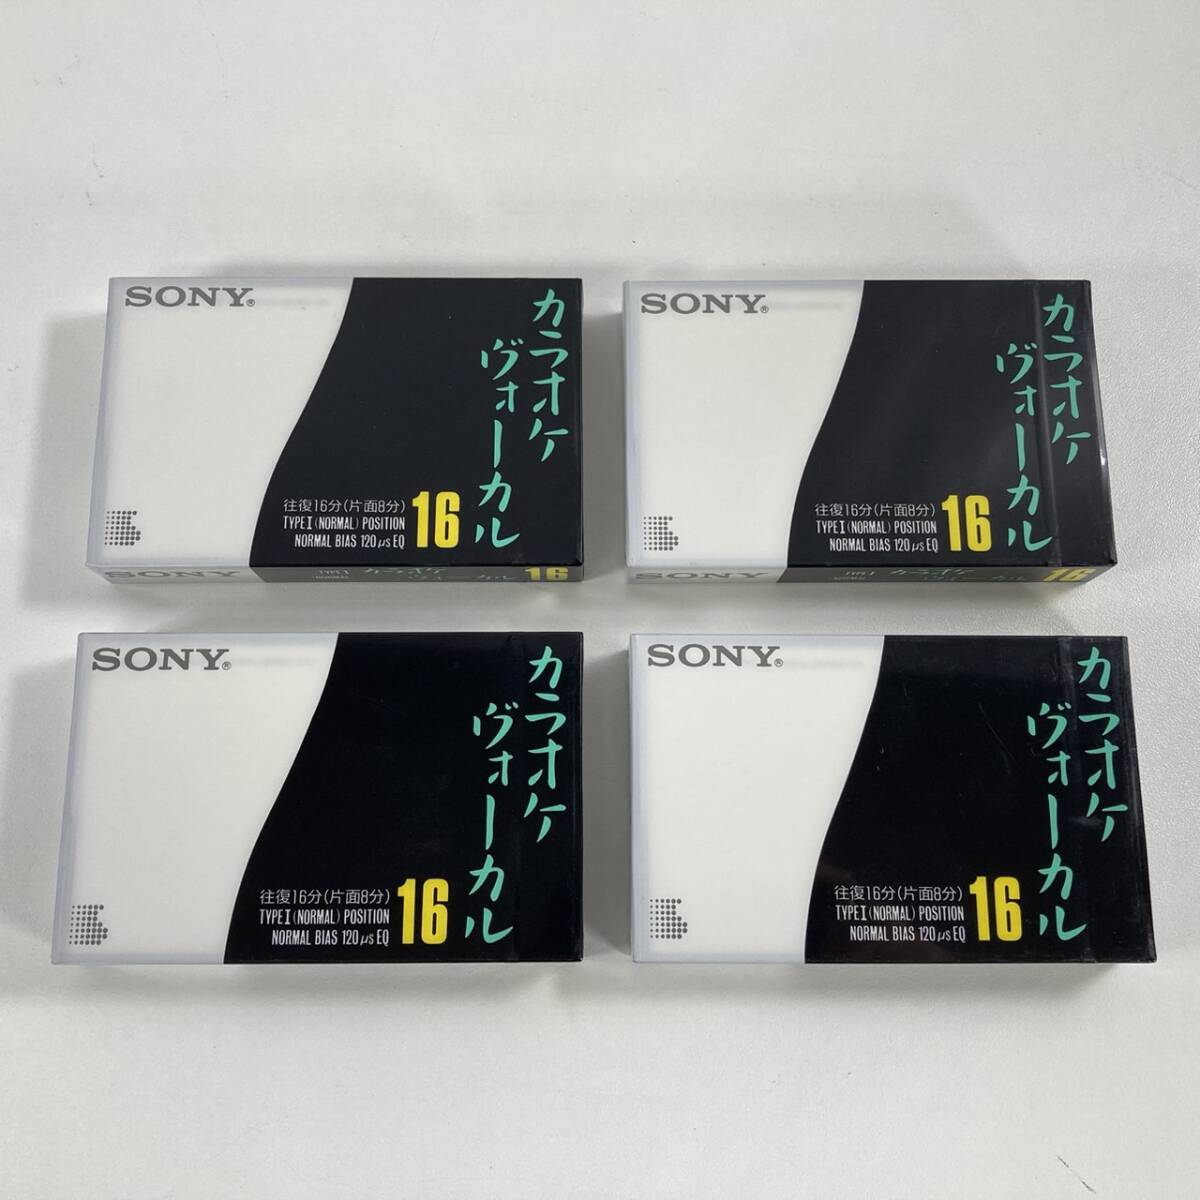  unopened goods SONY karaoke vo-karu for cassette tape KO16 TYPE1 normal position 4 pcs set that time thing retro 